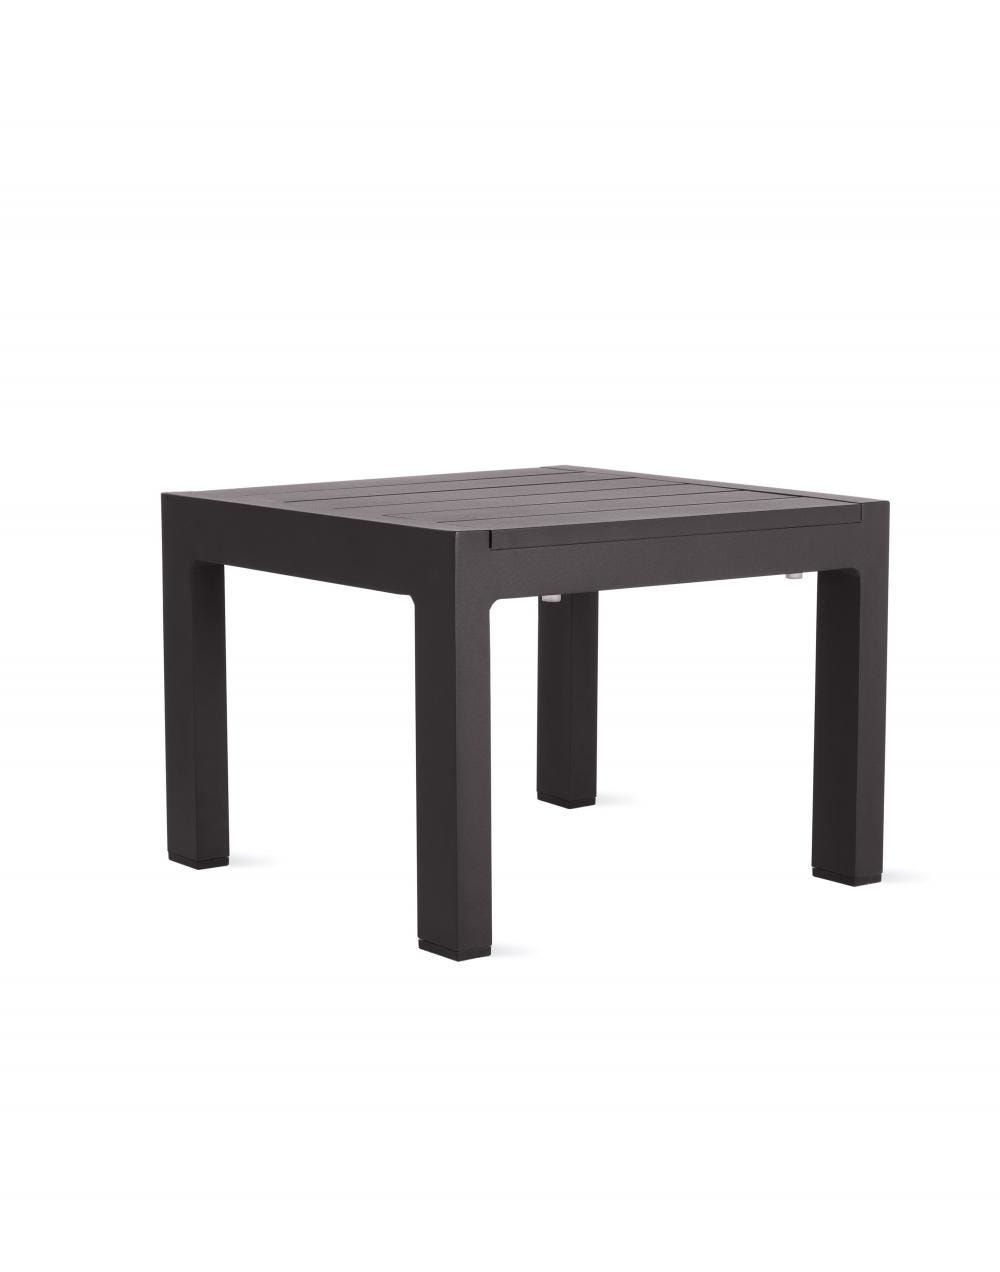 Case Furniture Outlet Eos Side Table Black Designer Furniture From Holloways Of Ludlow